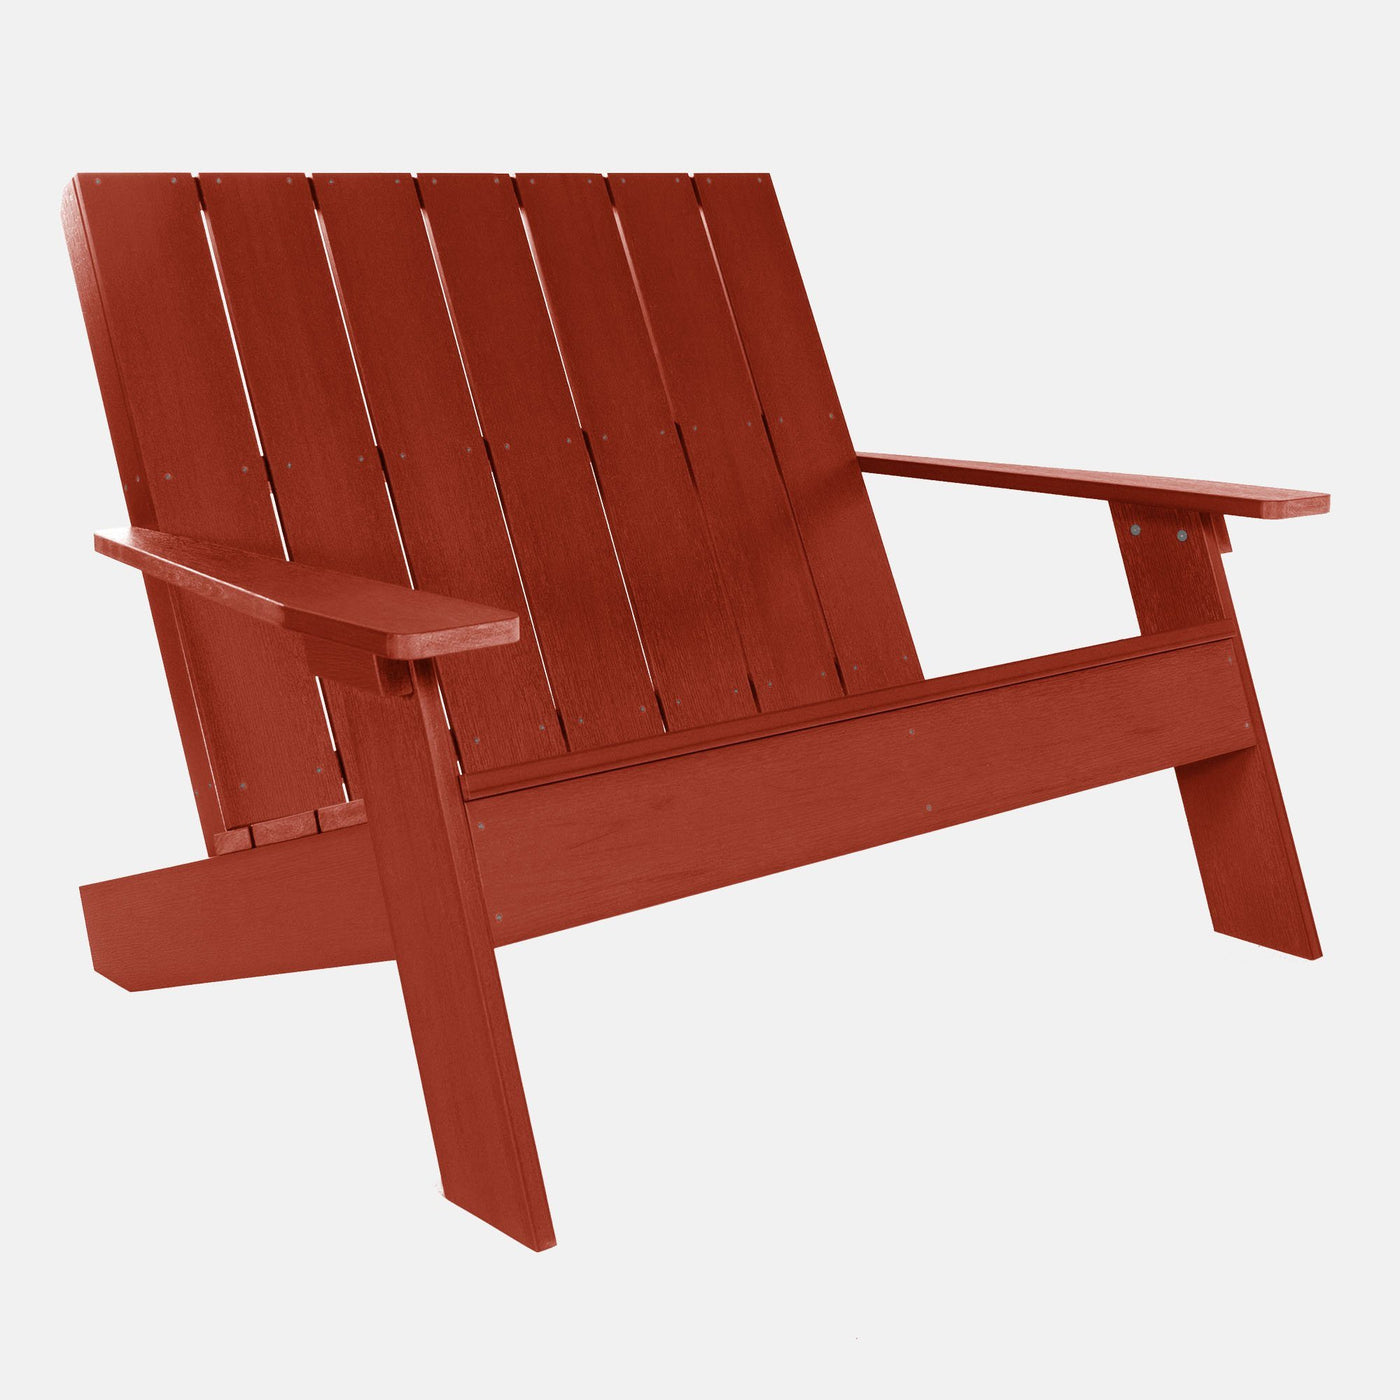 Italica conversation bench in Rustic Red